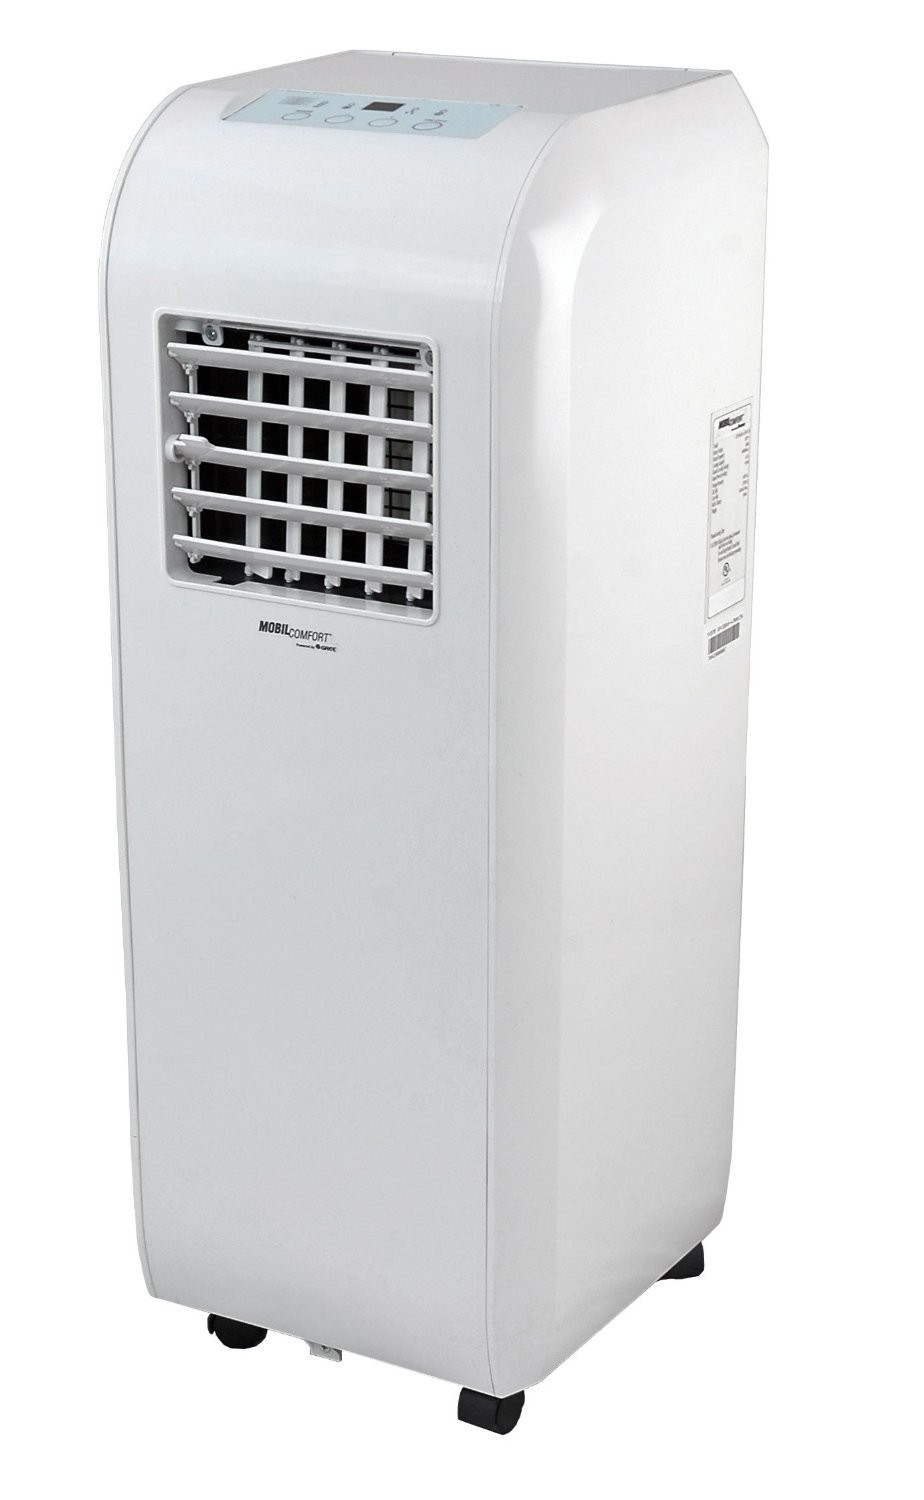 Soleus Air Ky 80 Conditioner 8000 Btu Mobile W with regard to proportions 924 X 1500